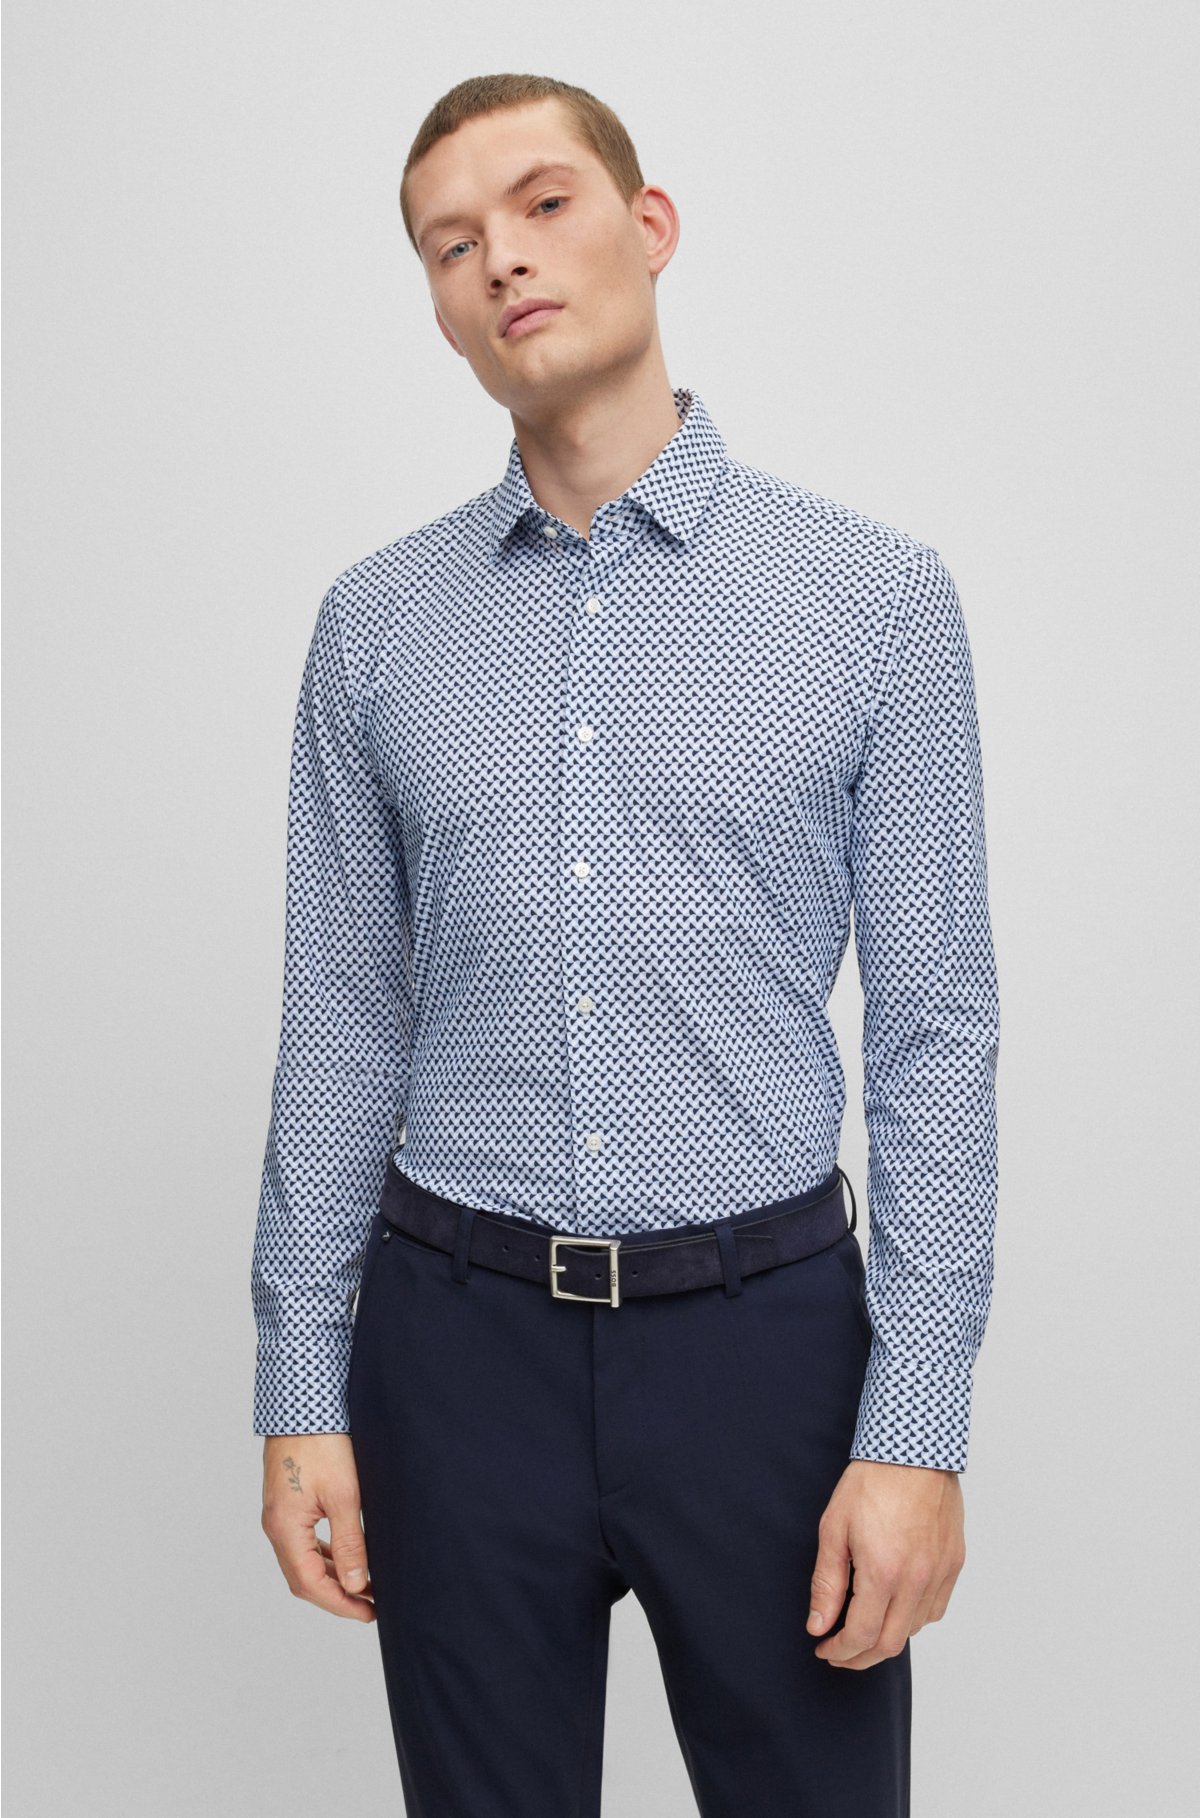 BOSS - Slim-fit shirt in stretch jersey